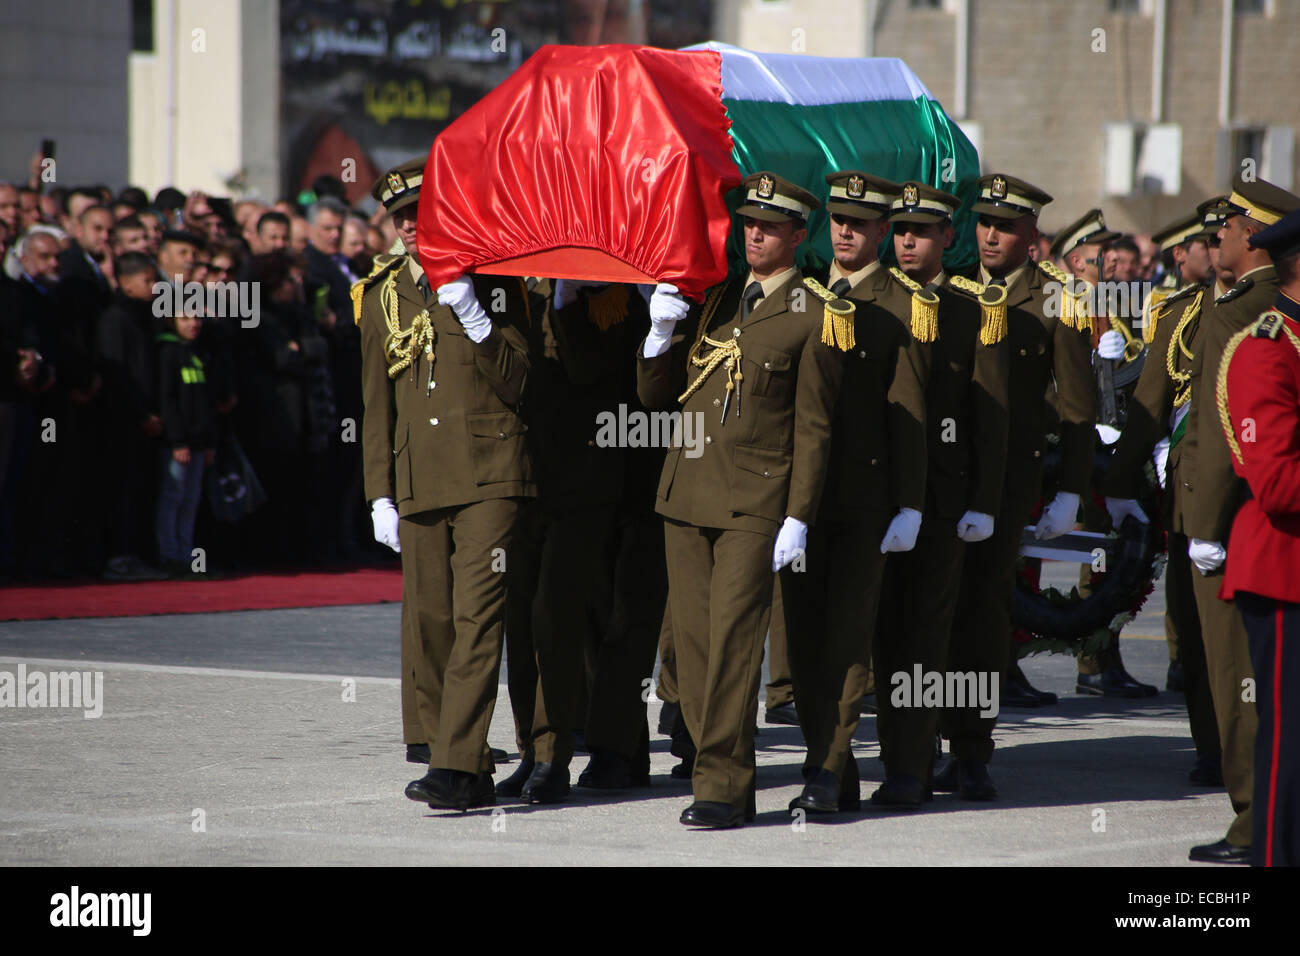 (141211) -- RAMALLAH, Dec. 11, 2014 (Xinhua) -- Palestinian honor guard carries the coffin during the funeral procession of the late Palestinian cabinet member Ziad Abu Ain at the Palestinian Authority headquarters in the West Bank city of Ramallah on Dec. 11, 2014. (Xinhua/Fadi Arouri) Stock Photo